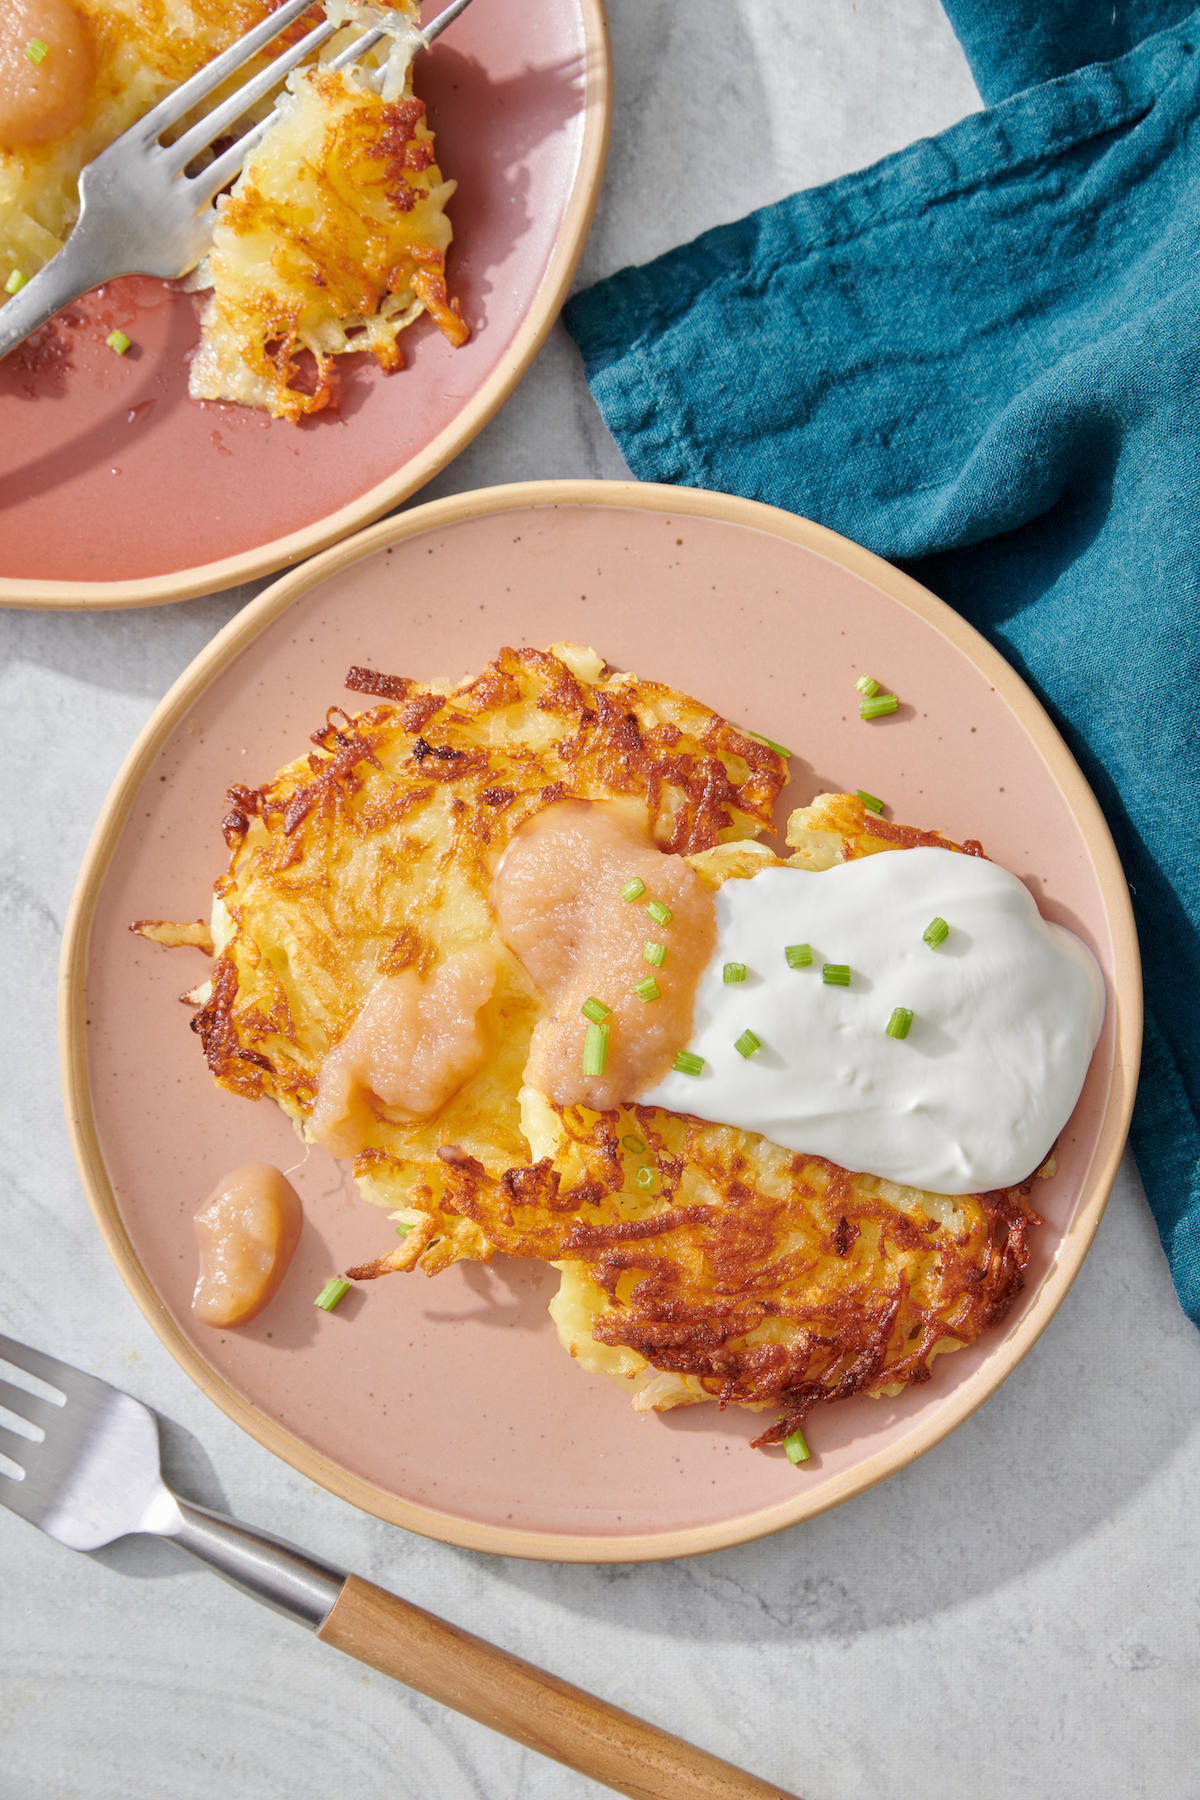 Two latkes on a plate topped with sour cream and applesauce.